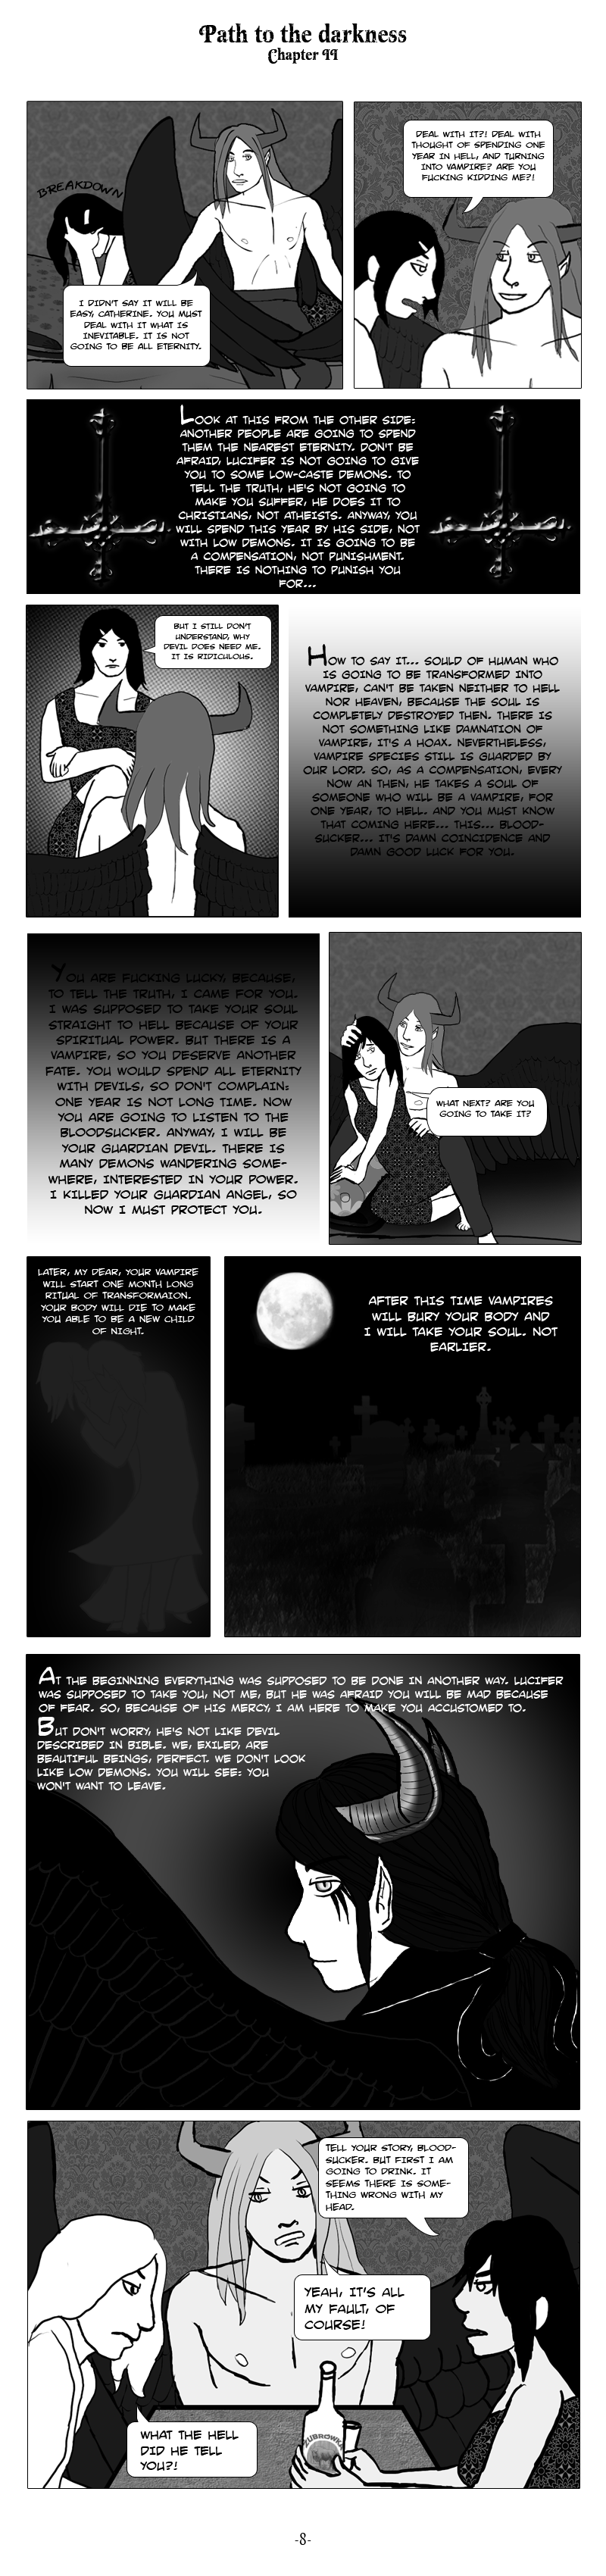 Chapter II Page IV